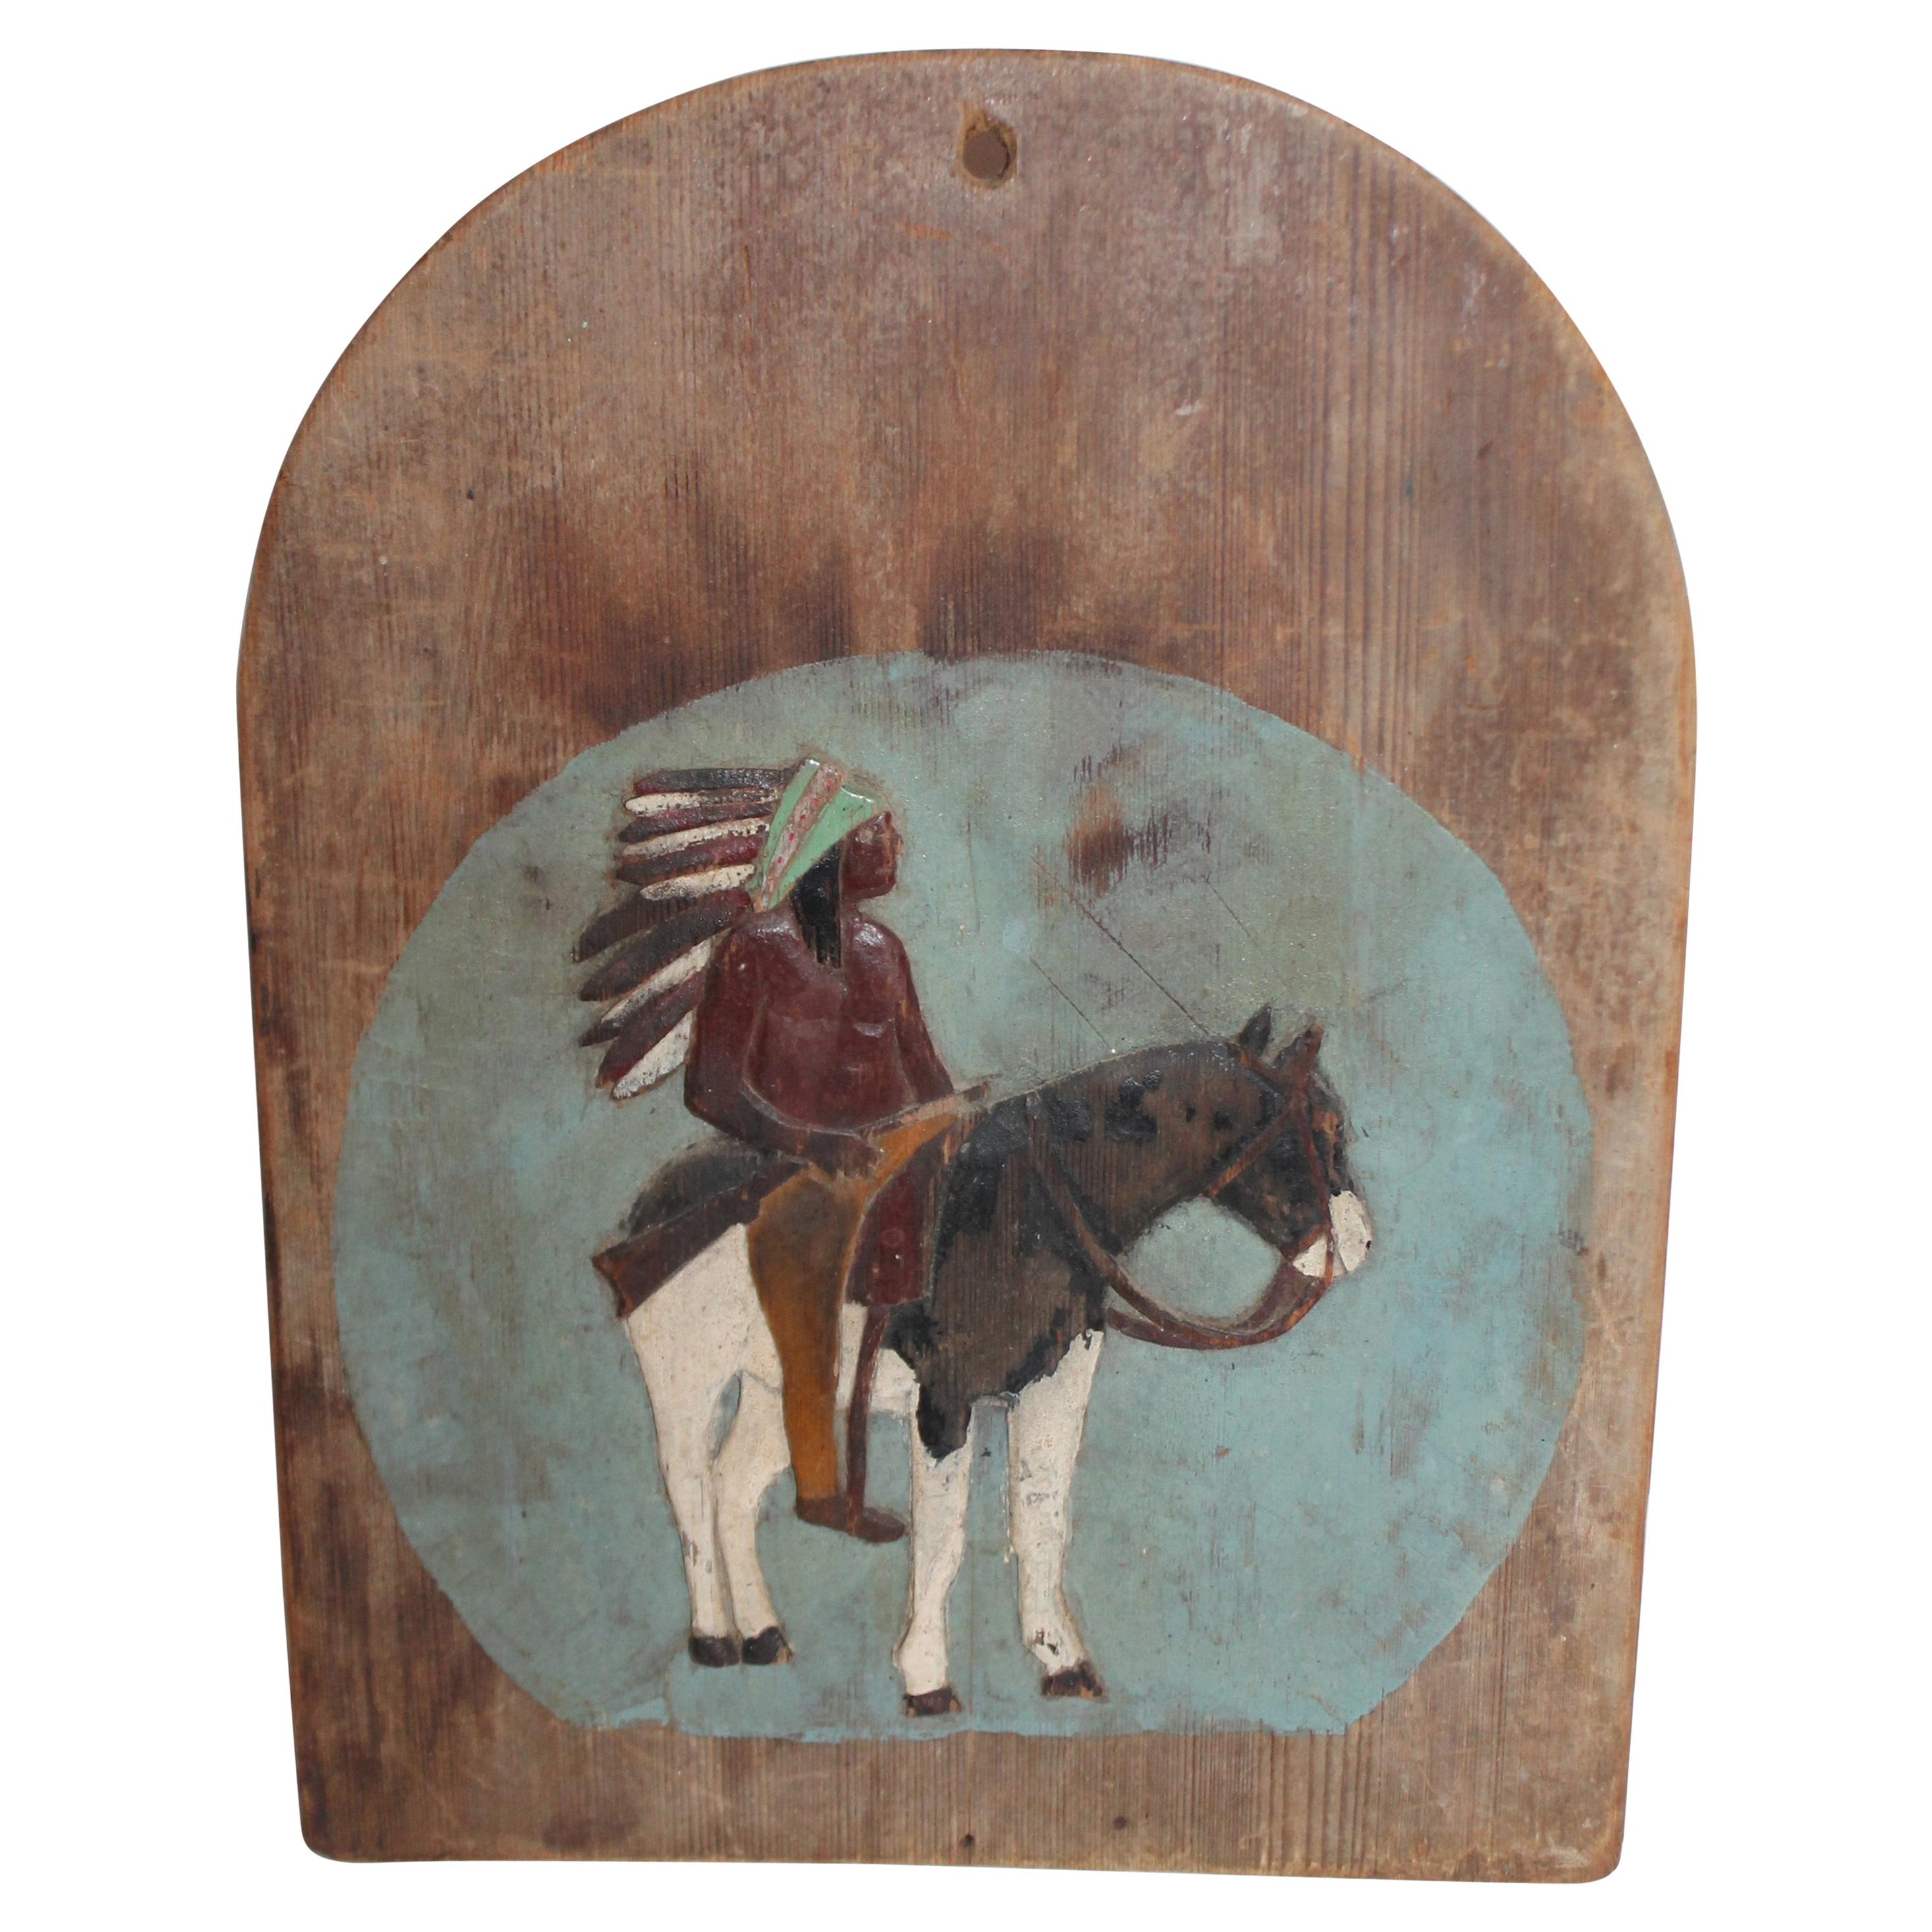 19th Century Hand Carved and Painted Indian and Rider Plaque